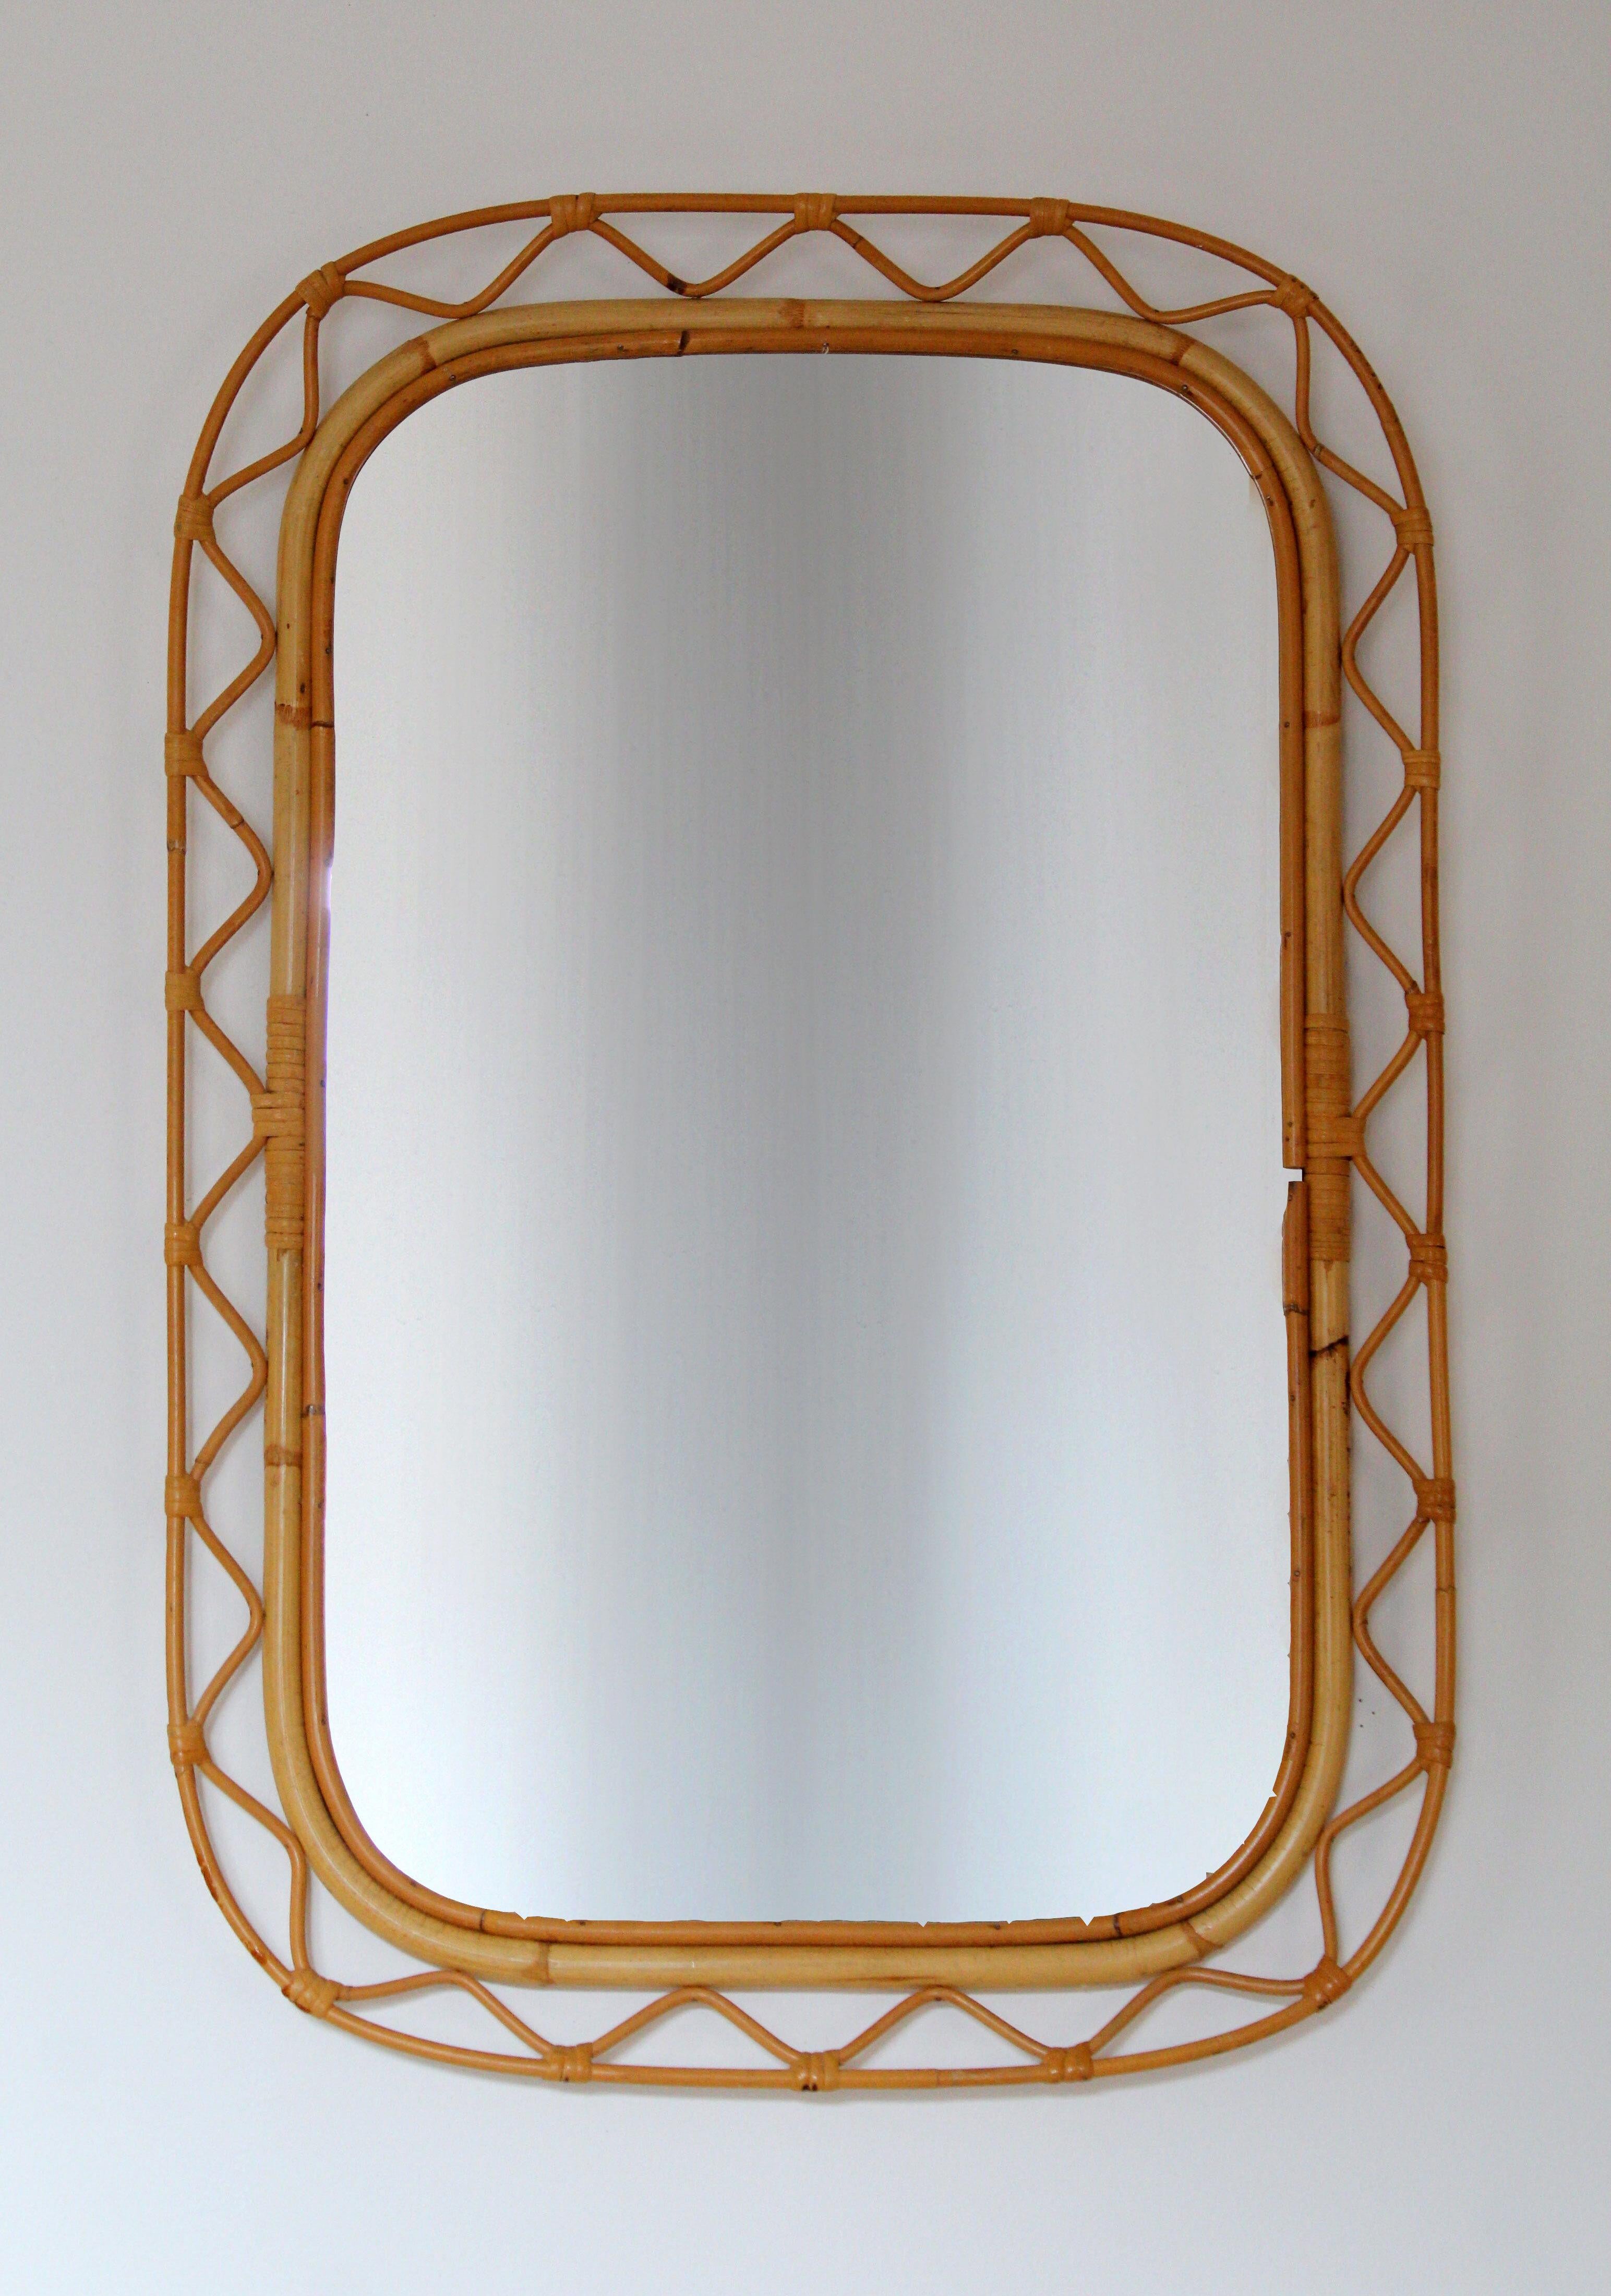 An organic mirror, of unknown Swedish production. Similar mirrors retailed by Svenskt Tenn, the iconic Swedish firm founded by Estrid Ericson and creatively led by Josef Frank. 

In finely braided wicker / rattan / cane and bambo.

Other